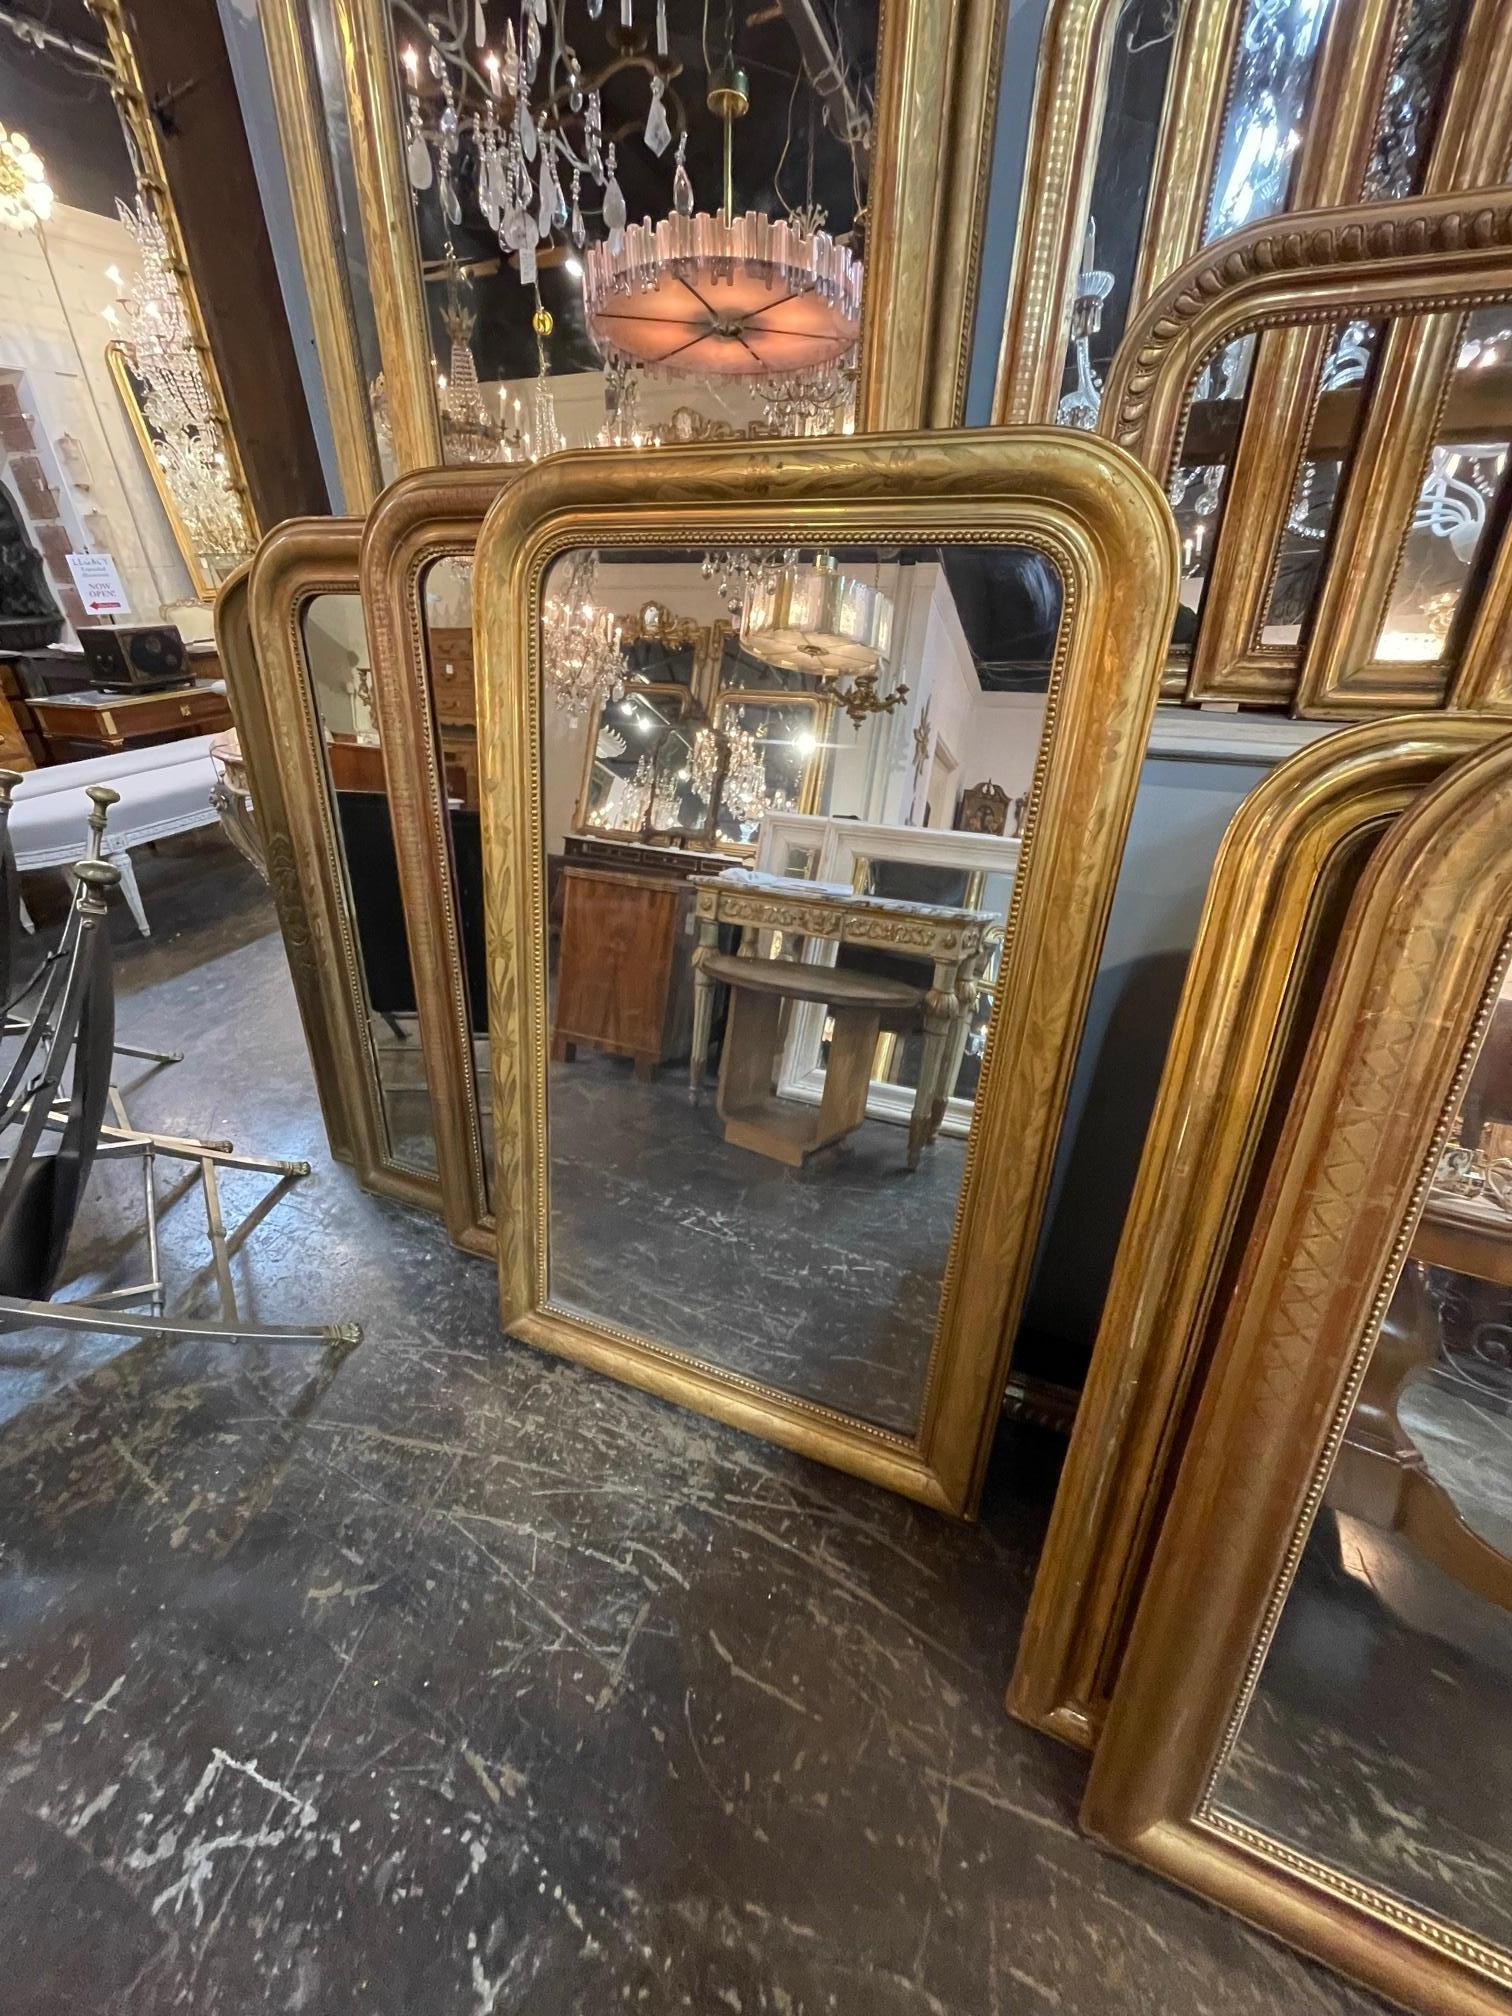 19th century French Louis Philippe mirror with floral pattern. Circa 1860. A fine addition to any home.